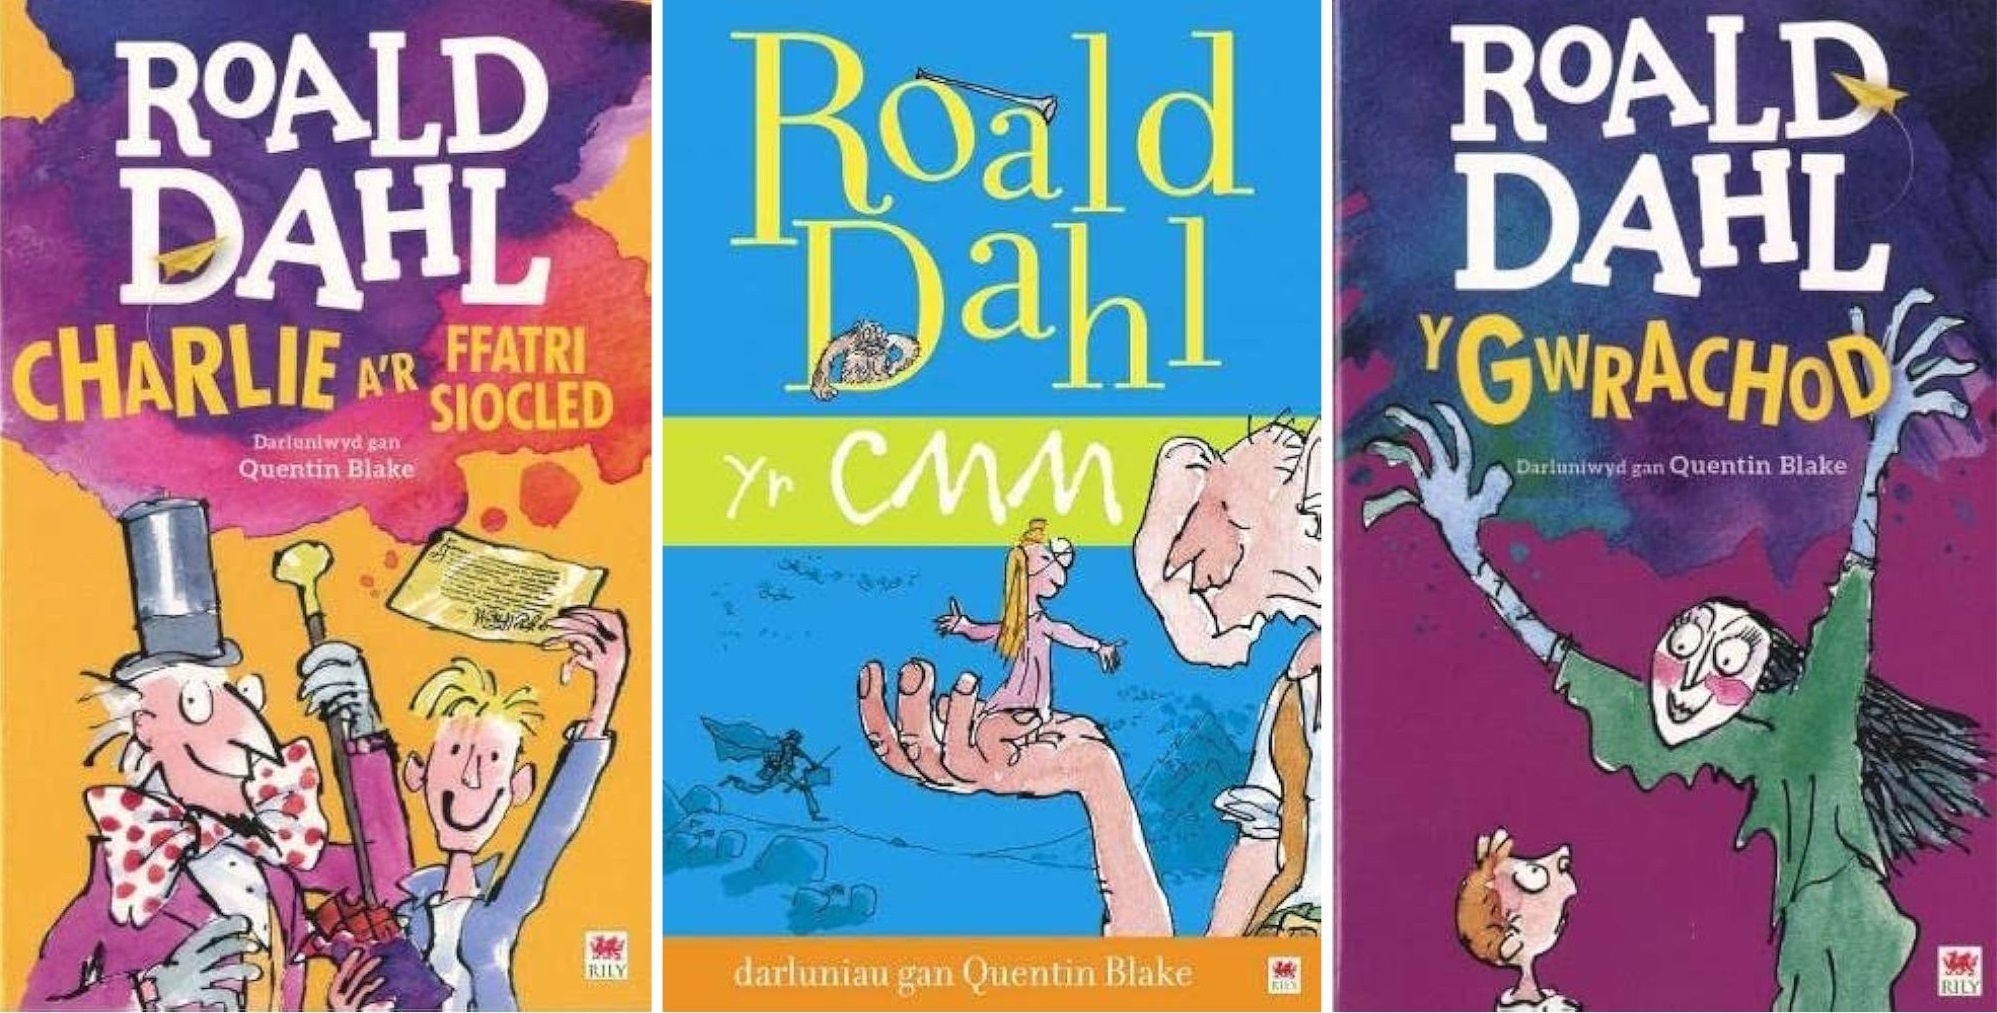 Some of Roald Dahls titles available in Welsh.